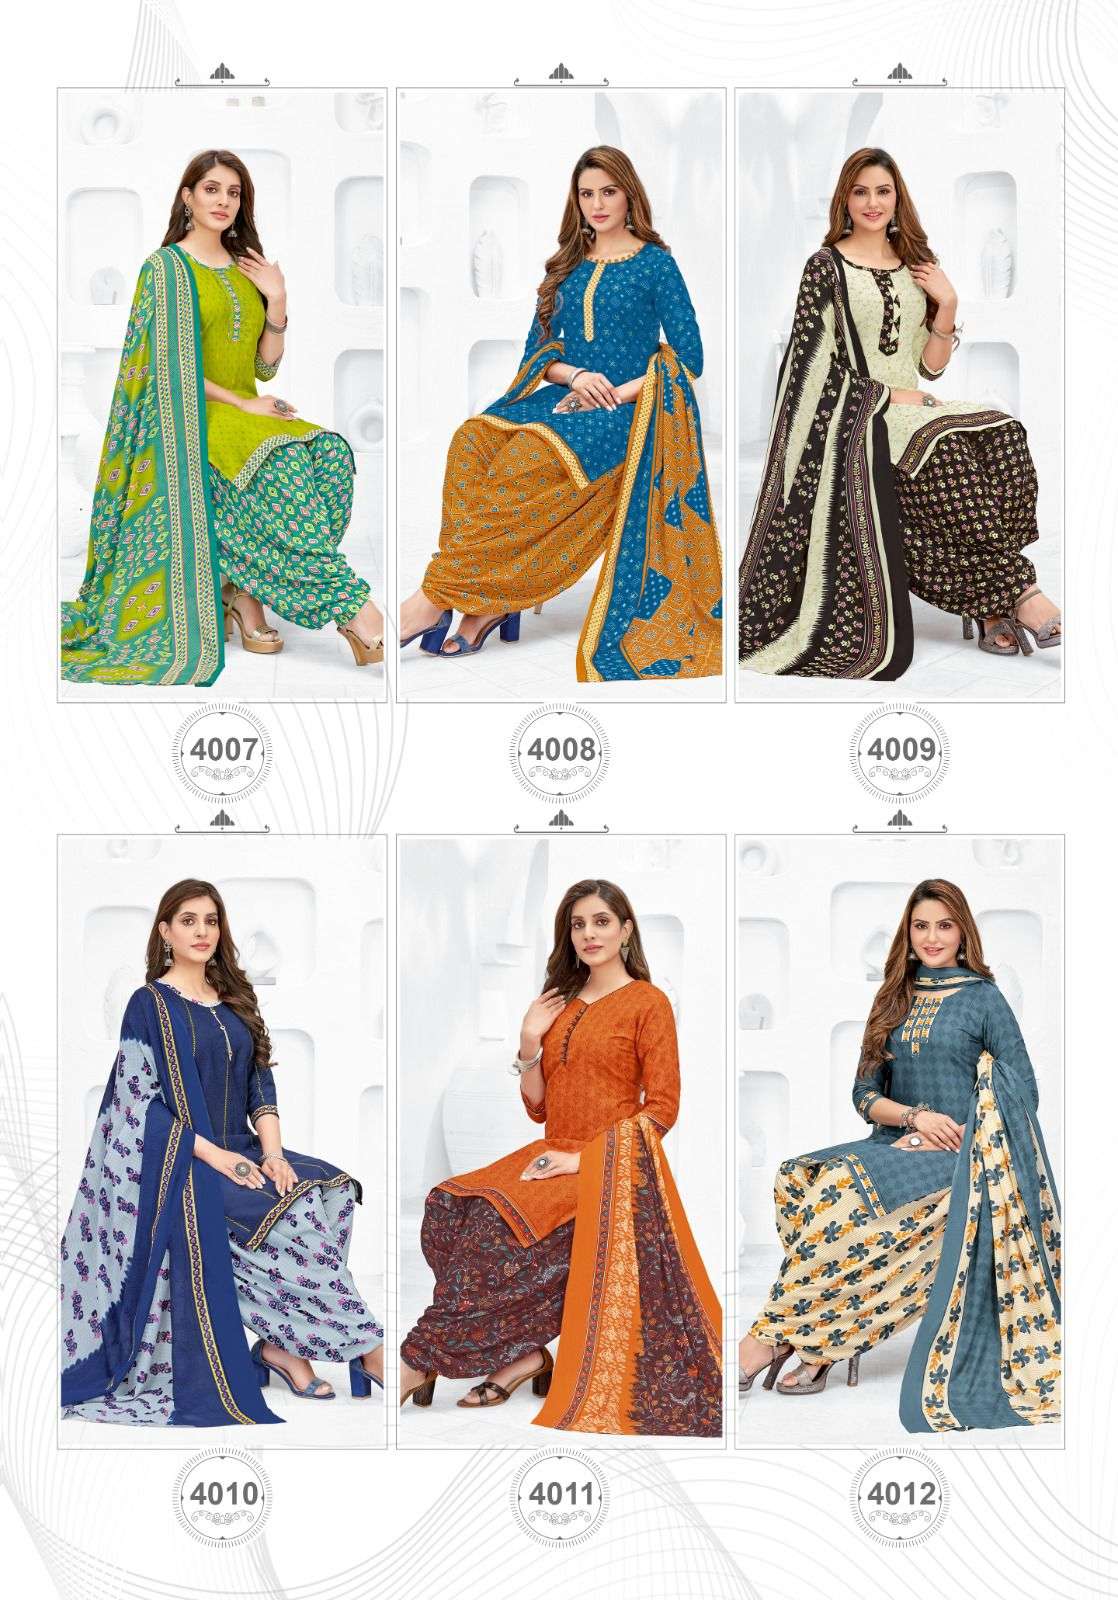 Sofiyana Vol-4 By Bali Lifestyle 4001 To 4012 Series Beautiful Festive Suits Colorful Stylish Fancy Casual Wear & Ethnic Wear Pure Cotton With Embroidered Dresses At Wholesale Price